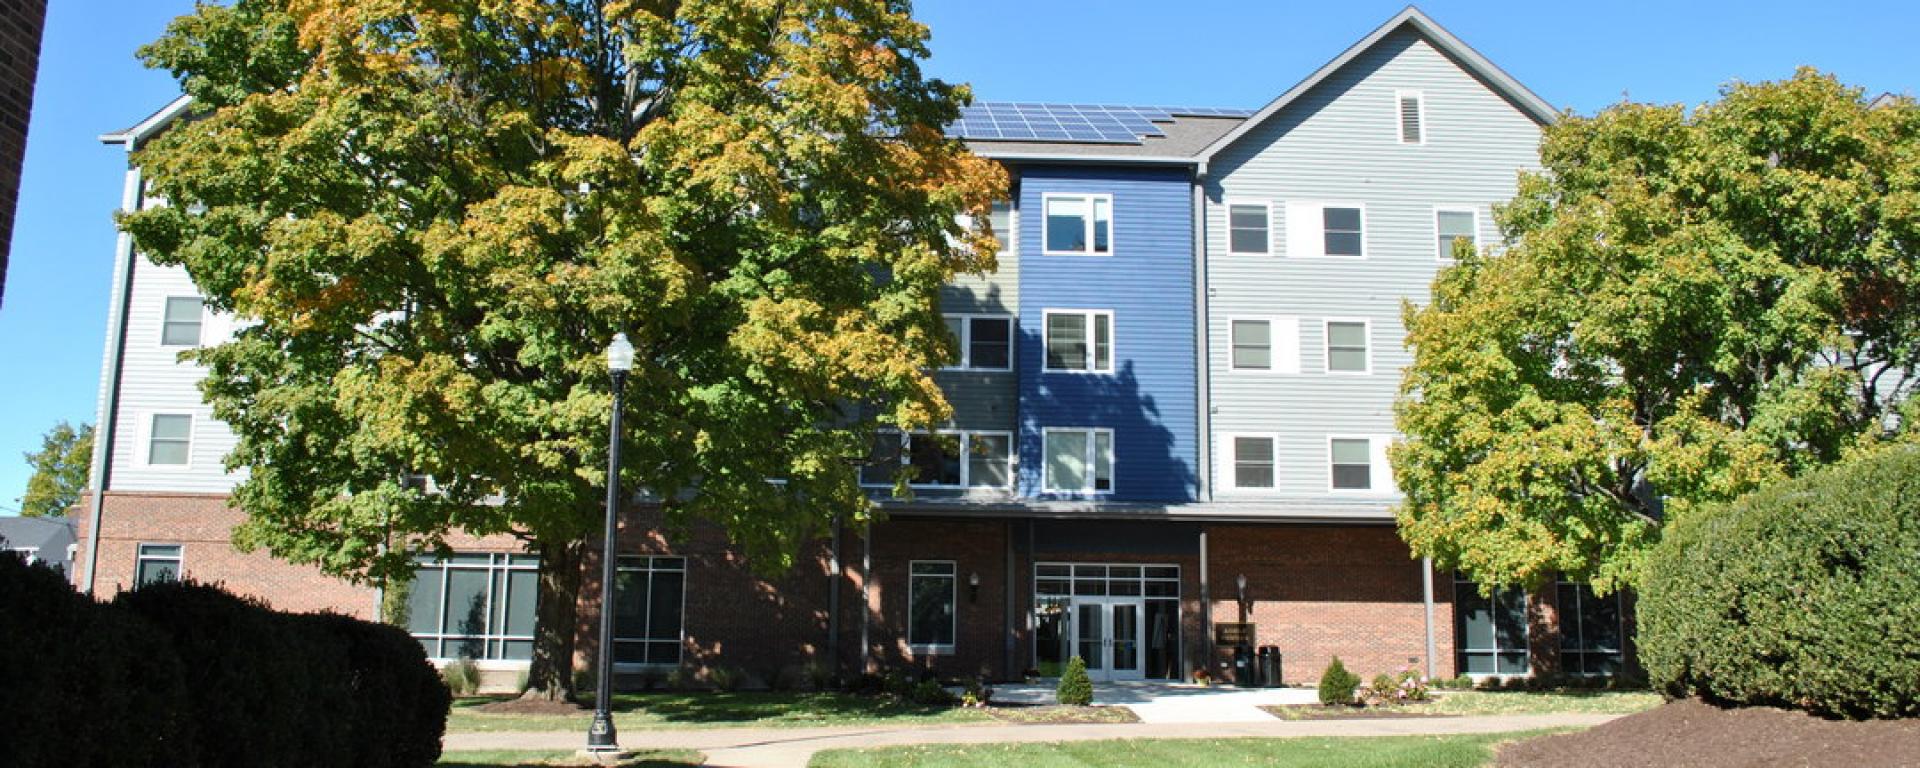 side profile of student housing during summer